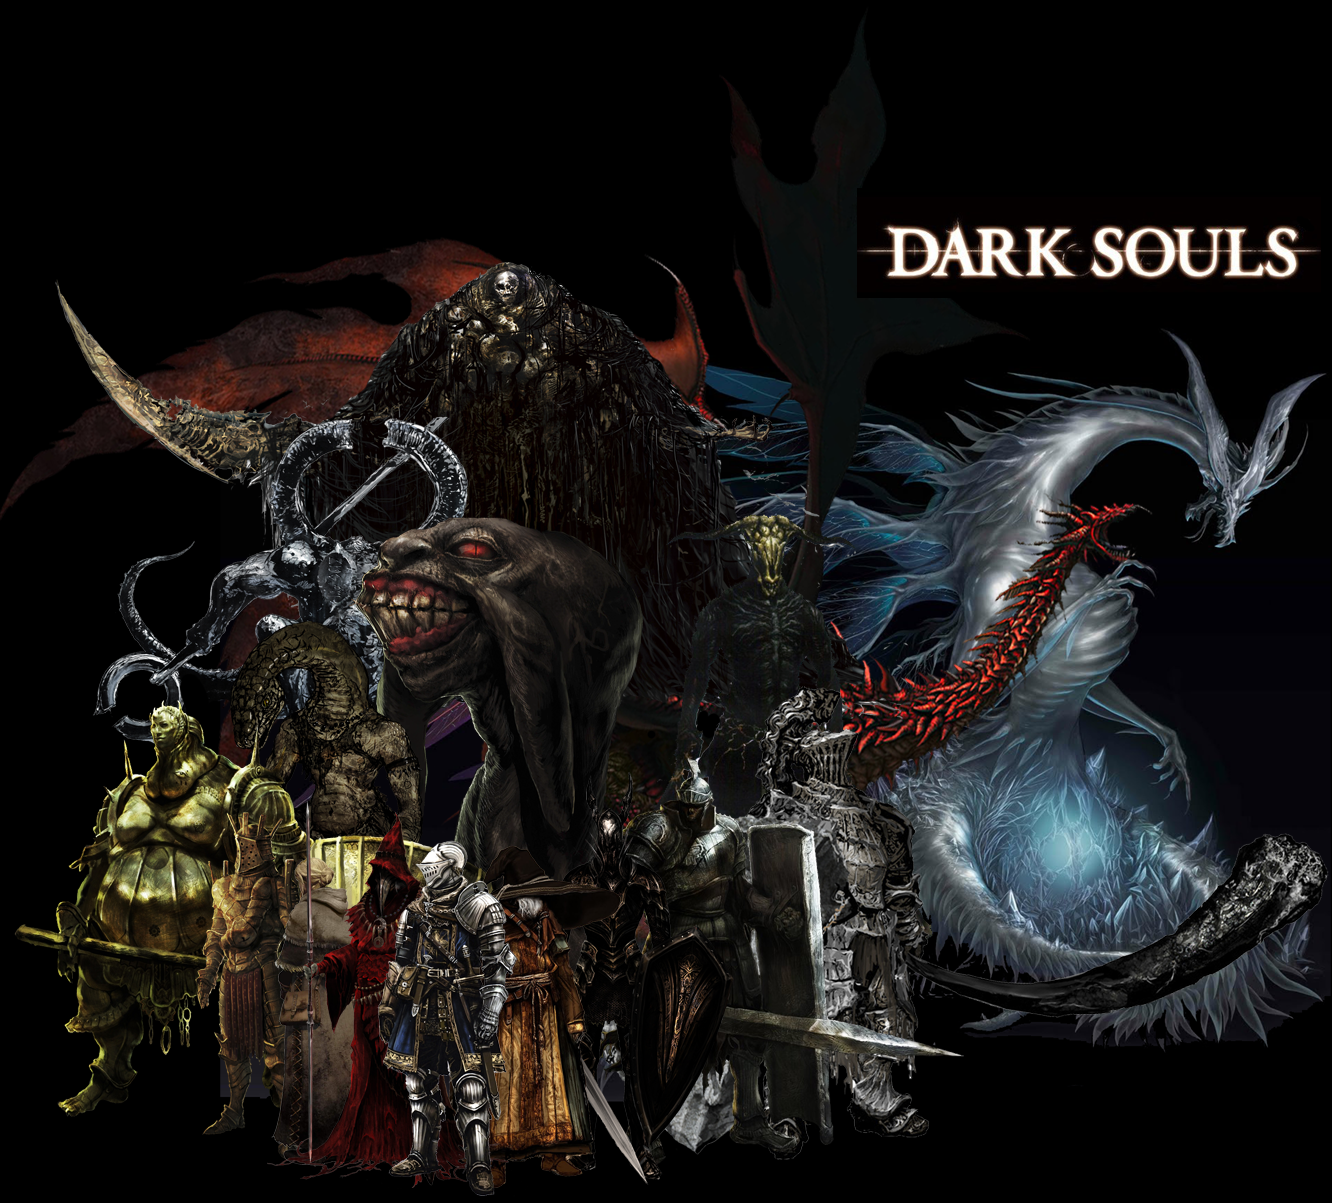 dark_souls_characters_by_giovannimicarelli-d4i2vde.png